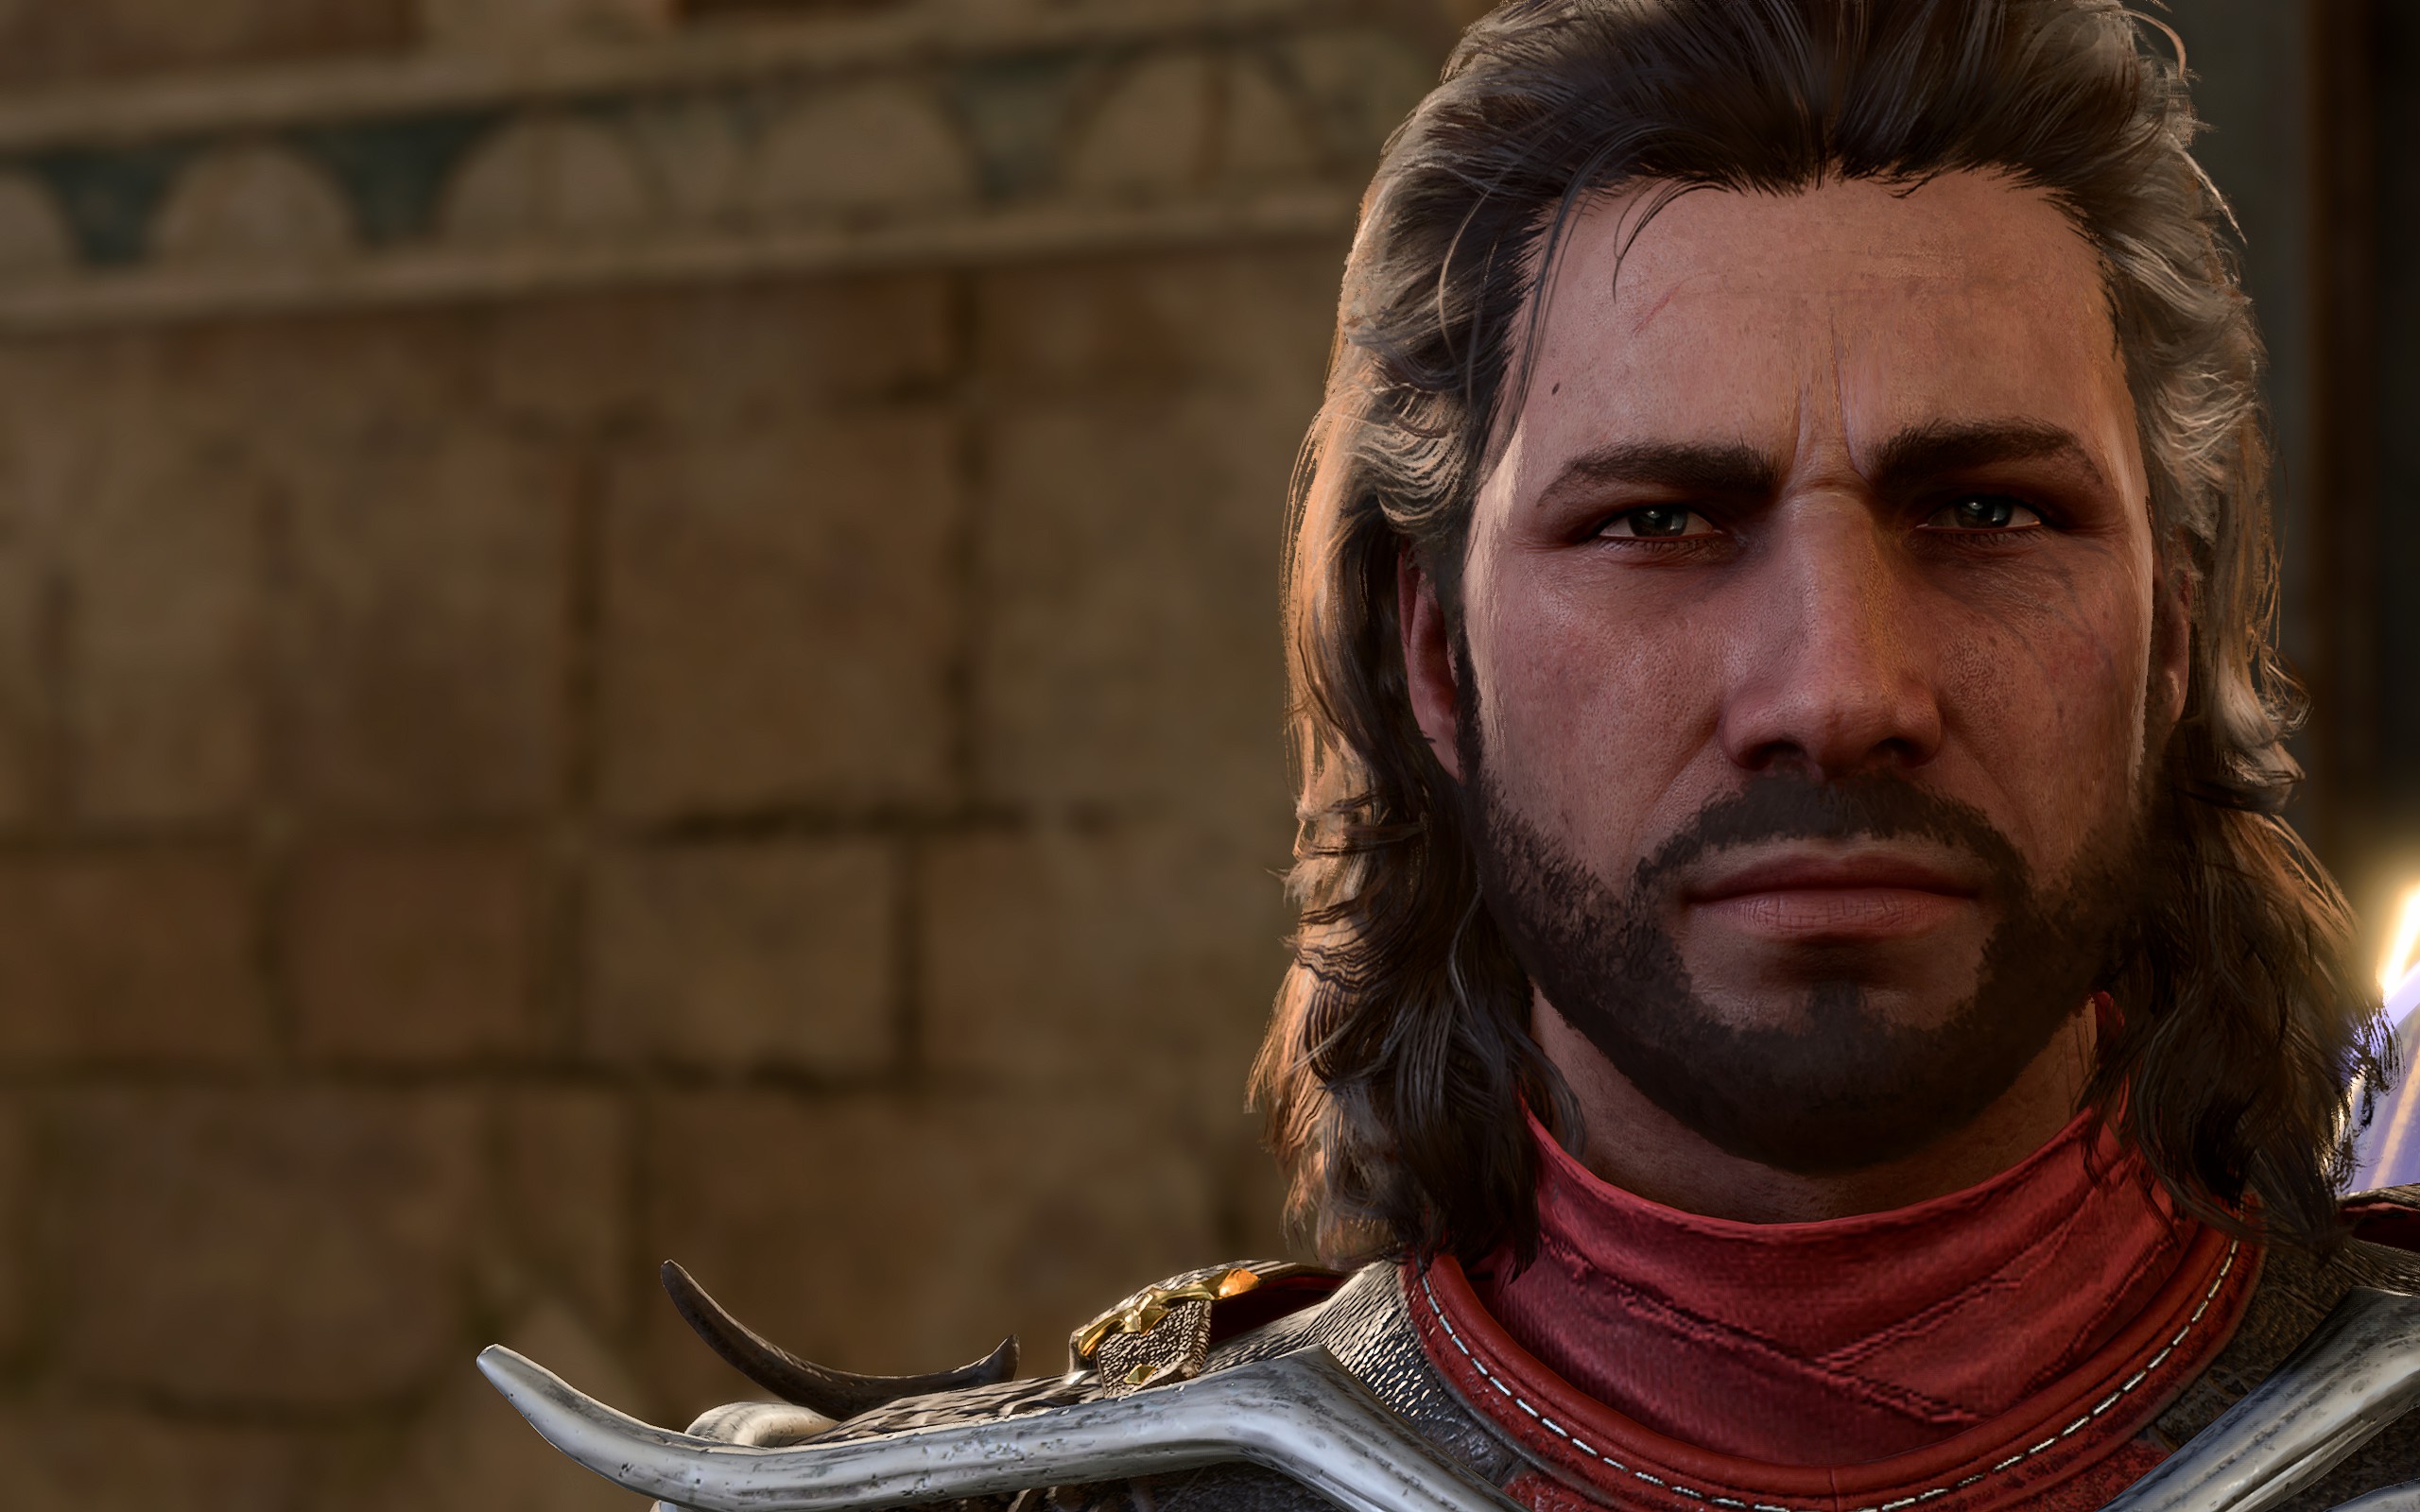 There’s a mod to fix Gale’s beard, making Baldur’s Gate 3 playable at last